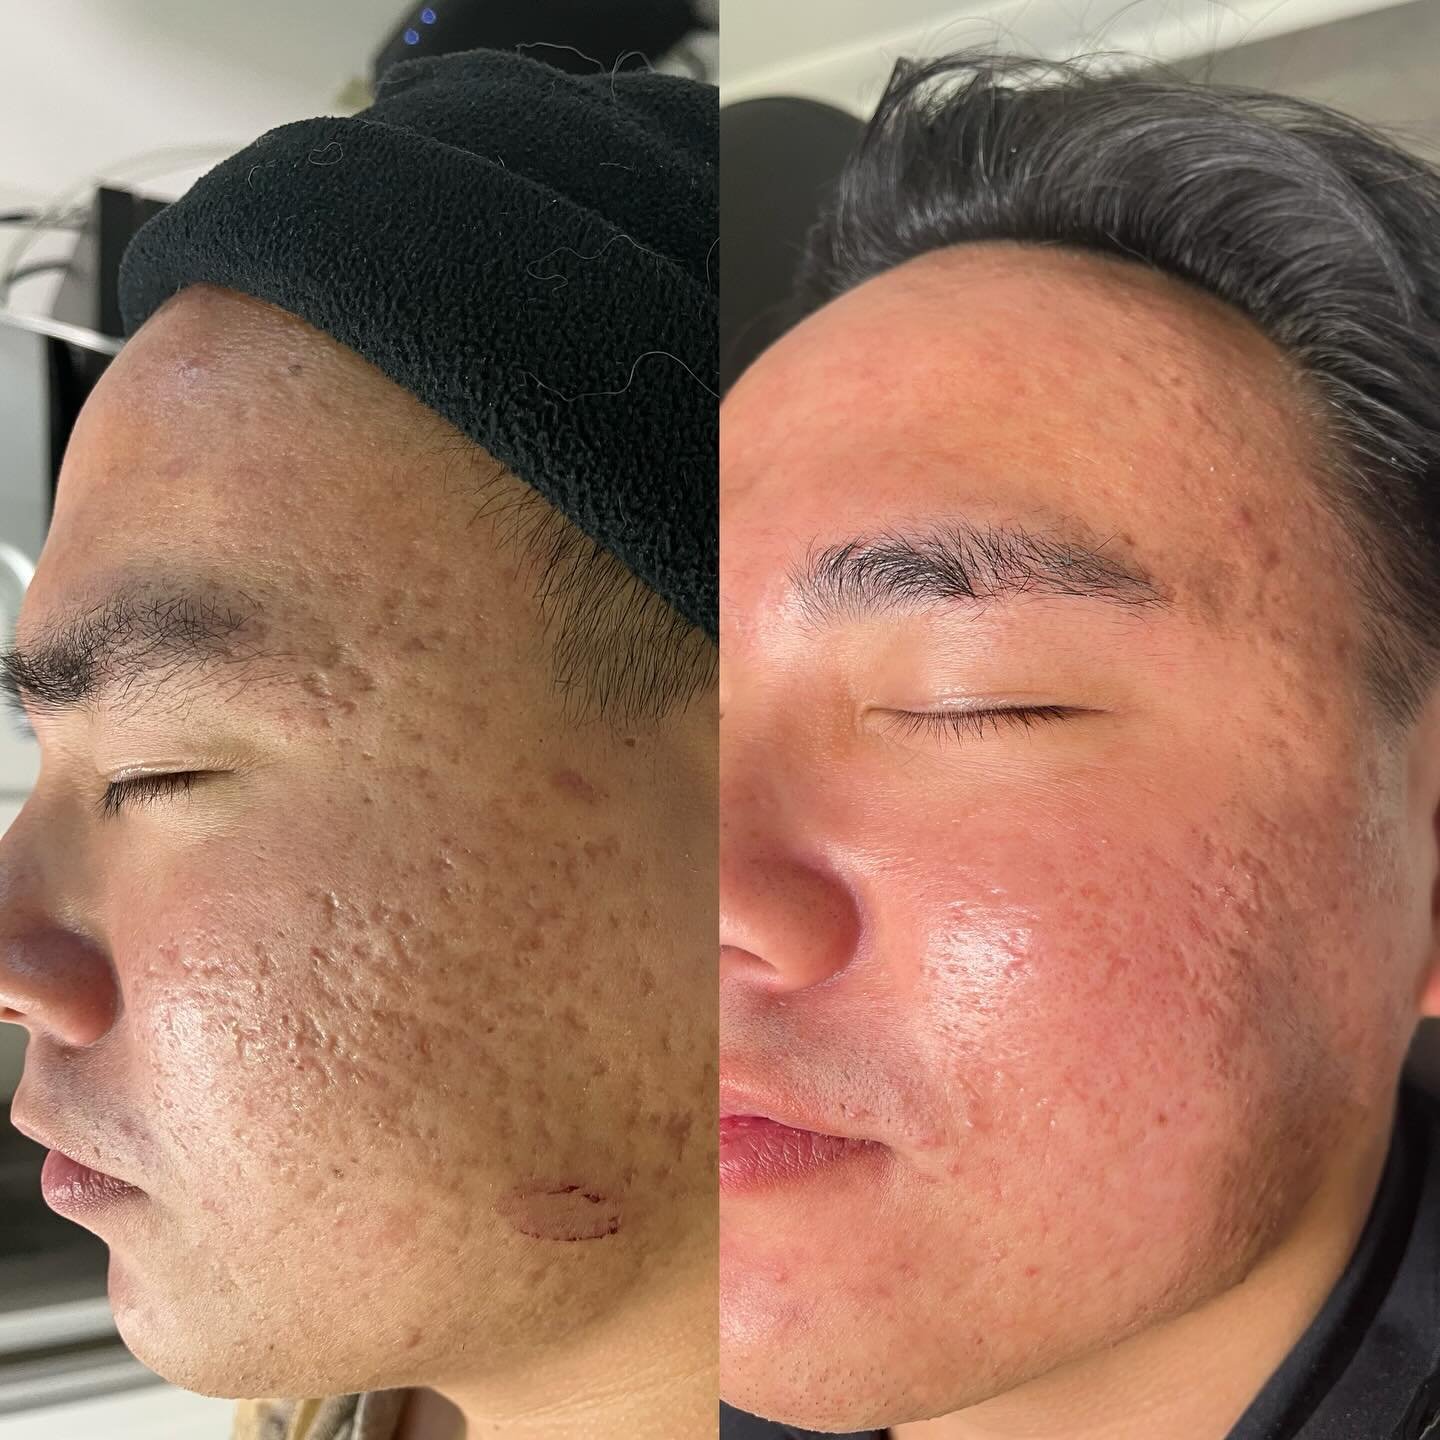 Clients often point to our RF Microneedling machine and ask &ldquo; What does this machine do?&rdquo; Well let me show you! 👉🏼 This client had 3 RF needle treatments with chemical peels in between to help his acne scarring. Micro needling causes in